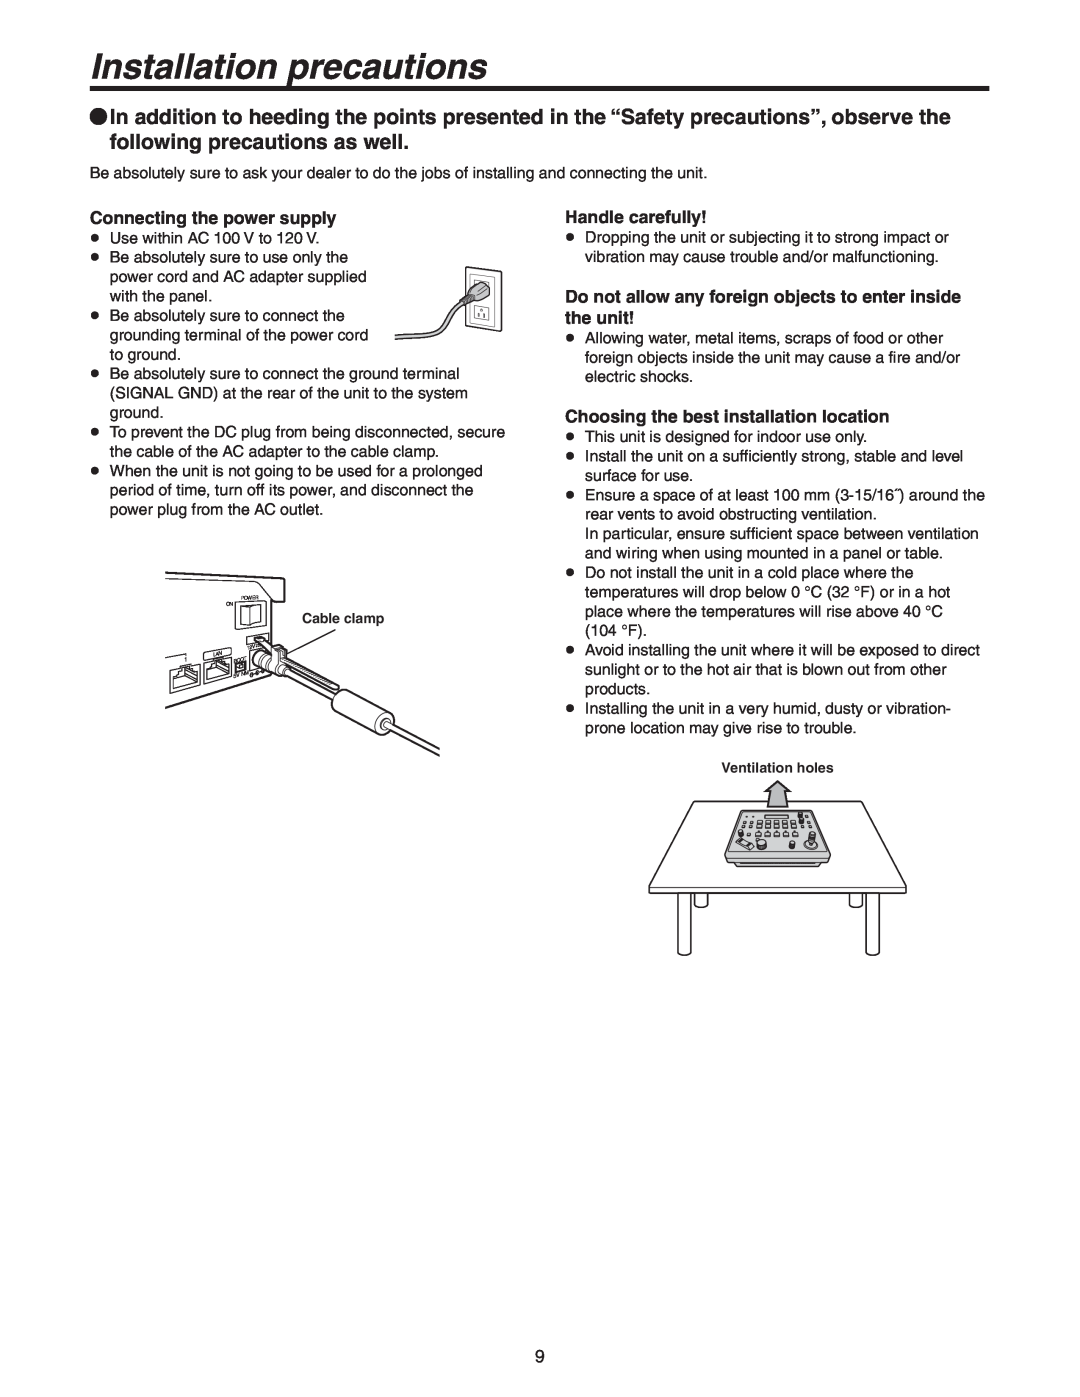 Panasonic AW-RP50N operating instructions Installation precautions, Connecting the power supply, Handle carefully 